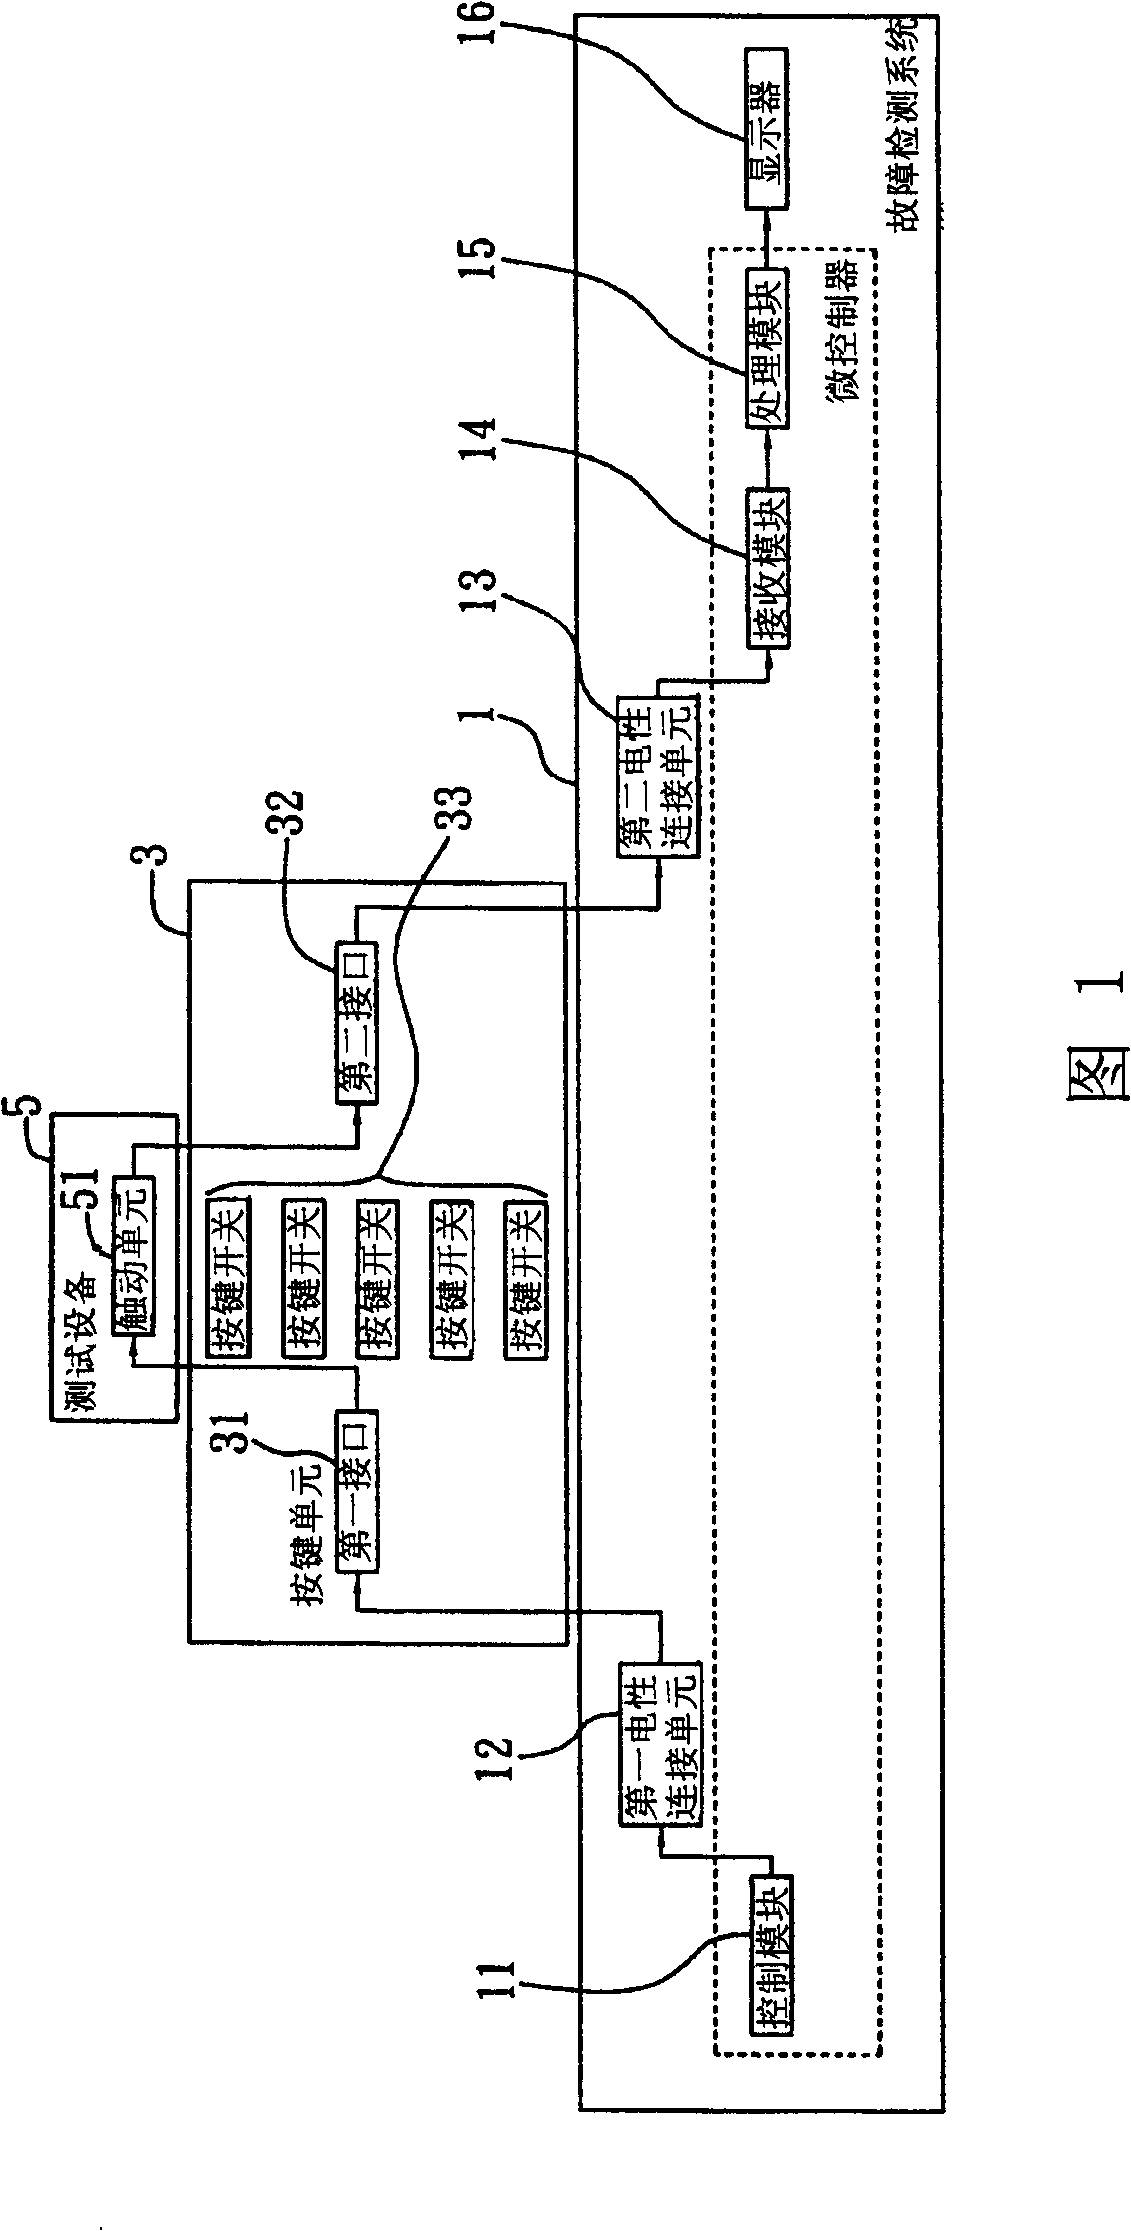 Malfunction detection system and method thereof